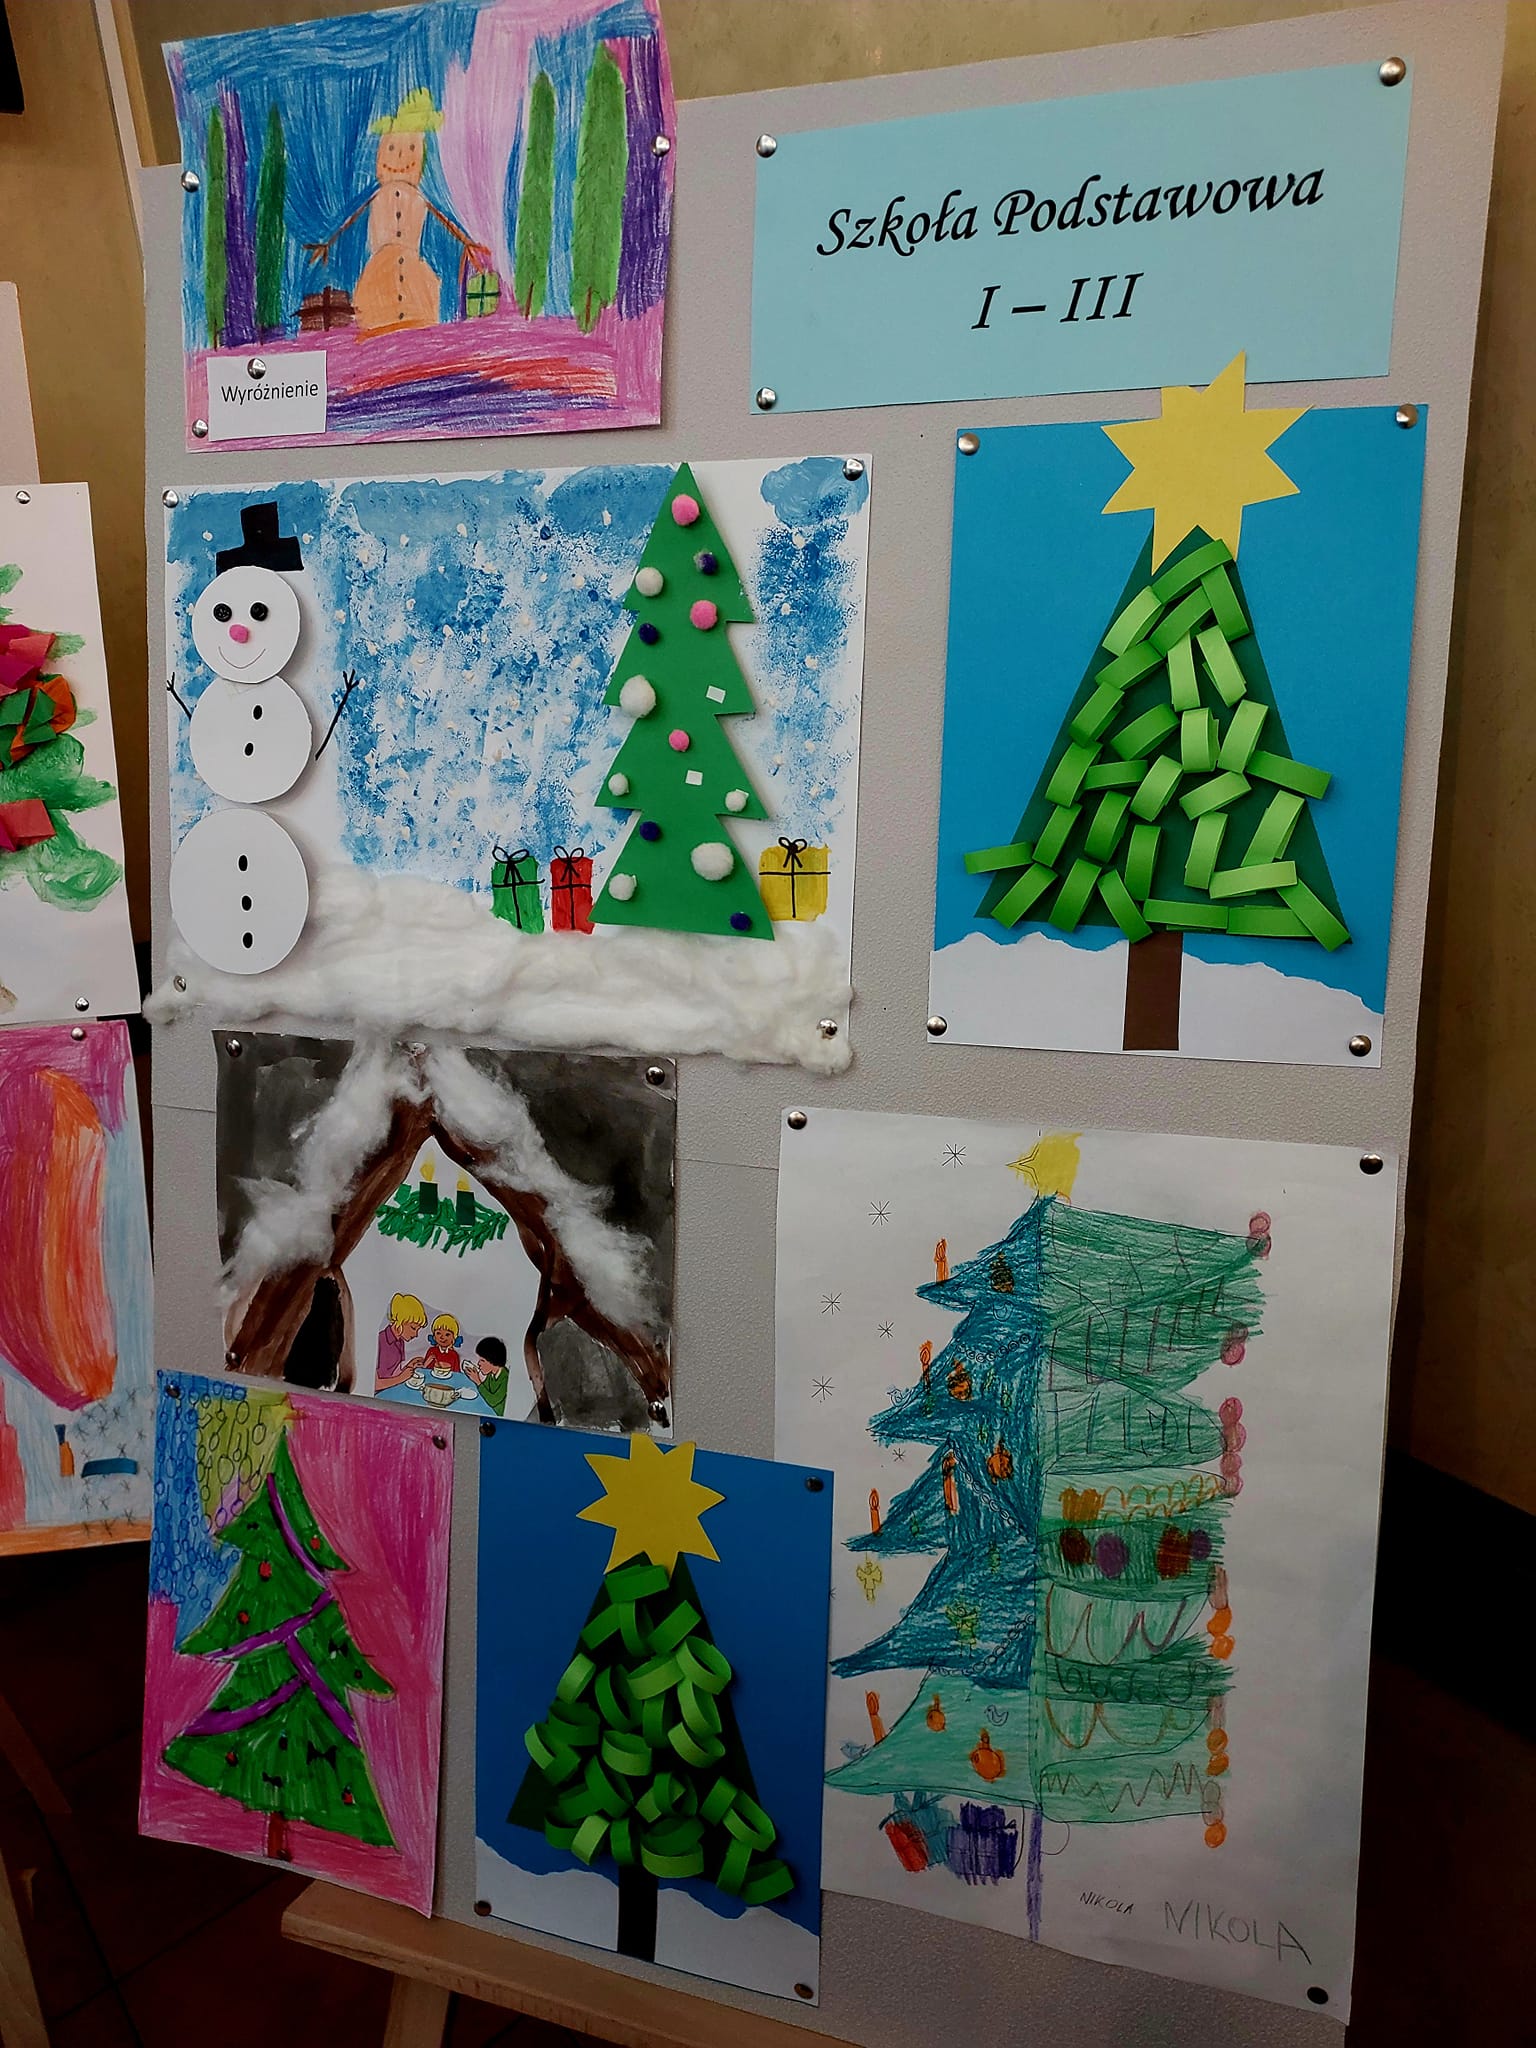   Presented on the easel are works in the elementary school category I - III, participating in the art contest 